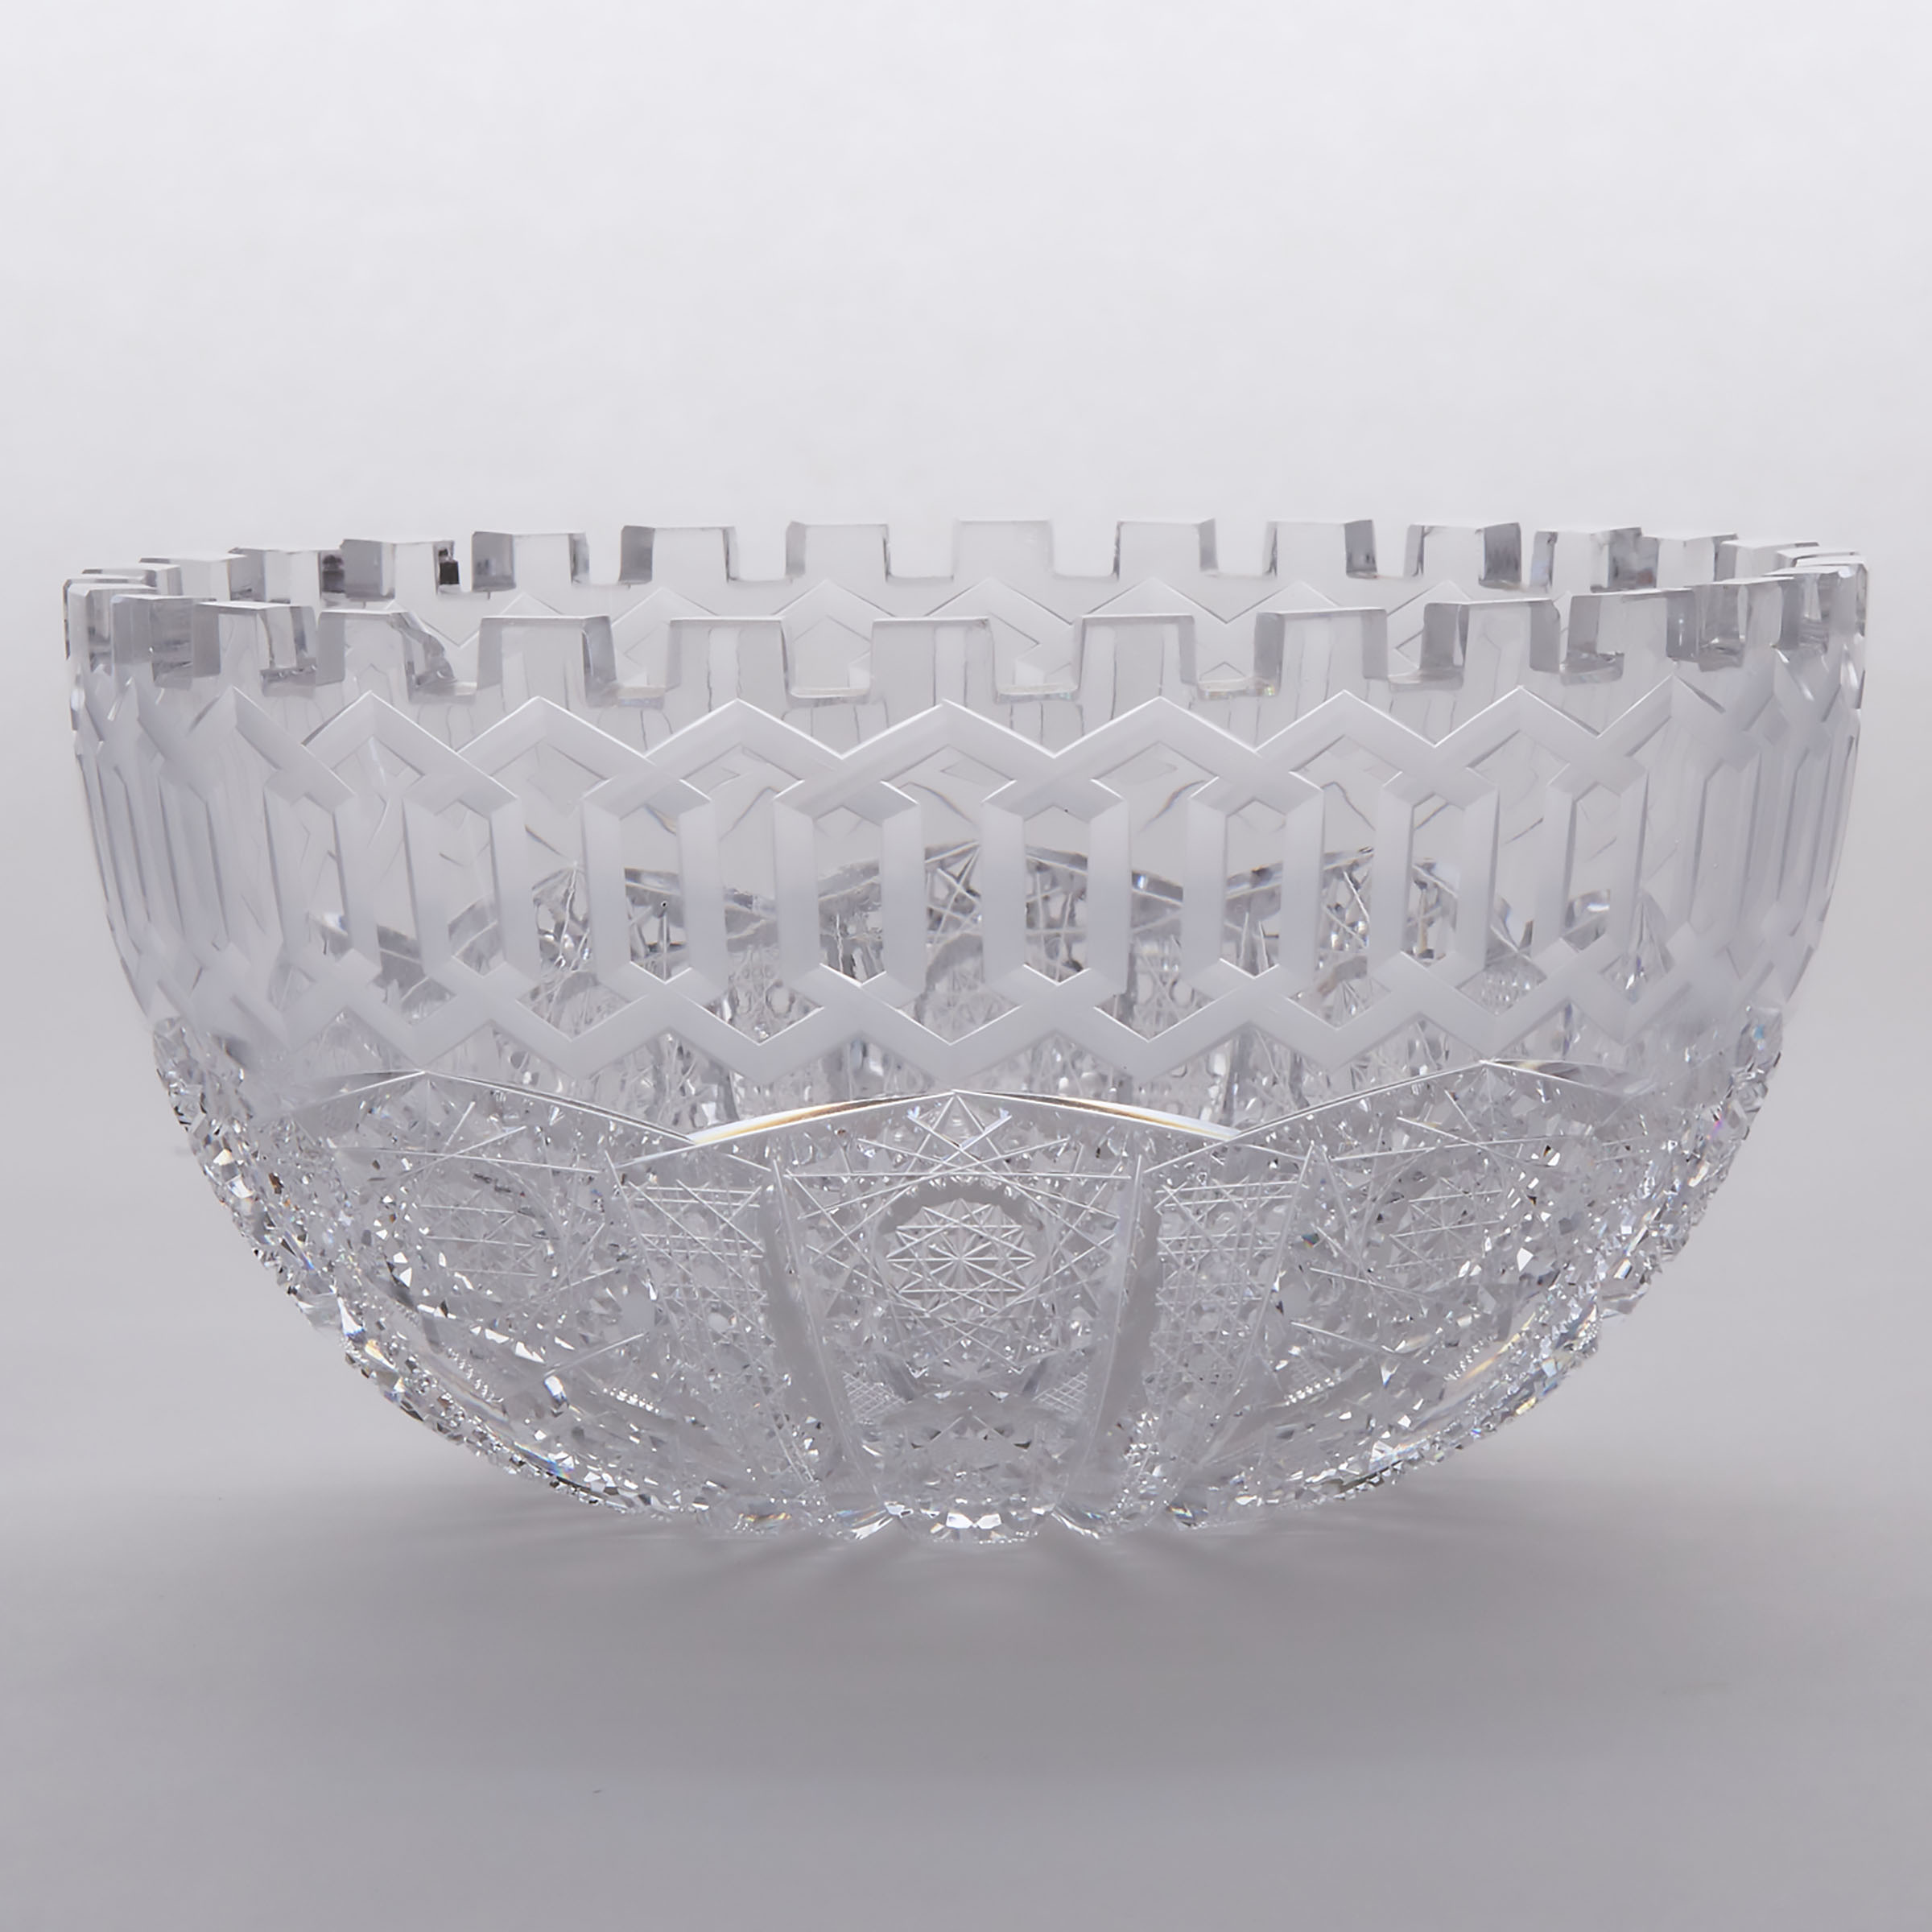 Roden 'Norman' ('Alhambra') Pattern Cut Glass Berry Bowl, c.1910